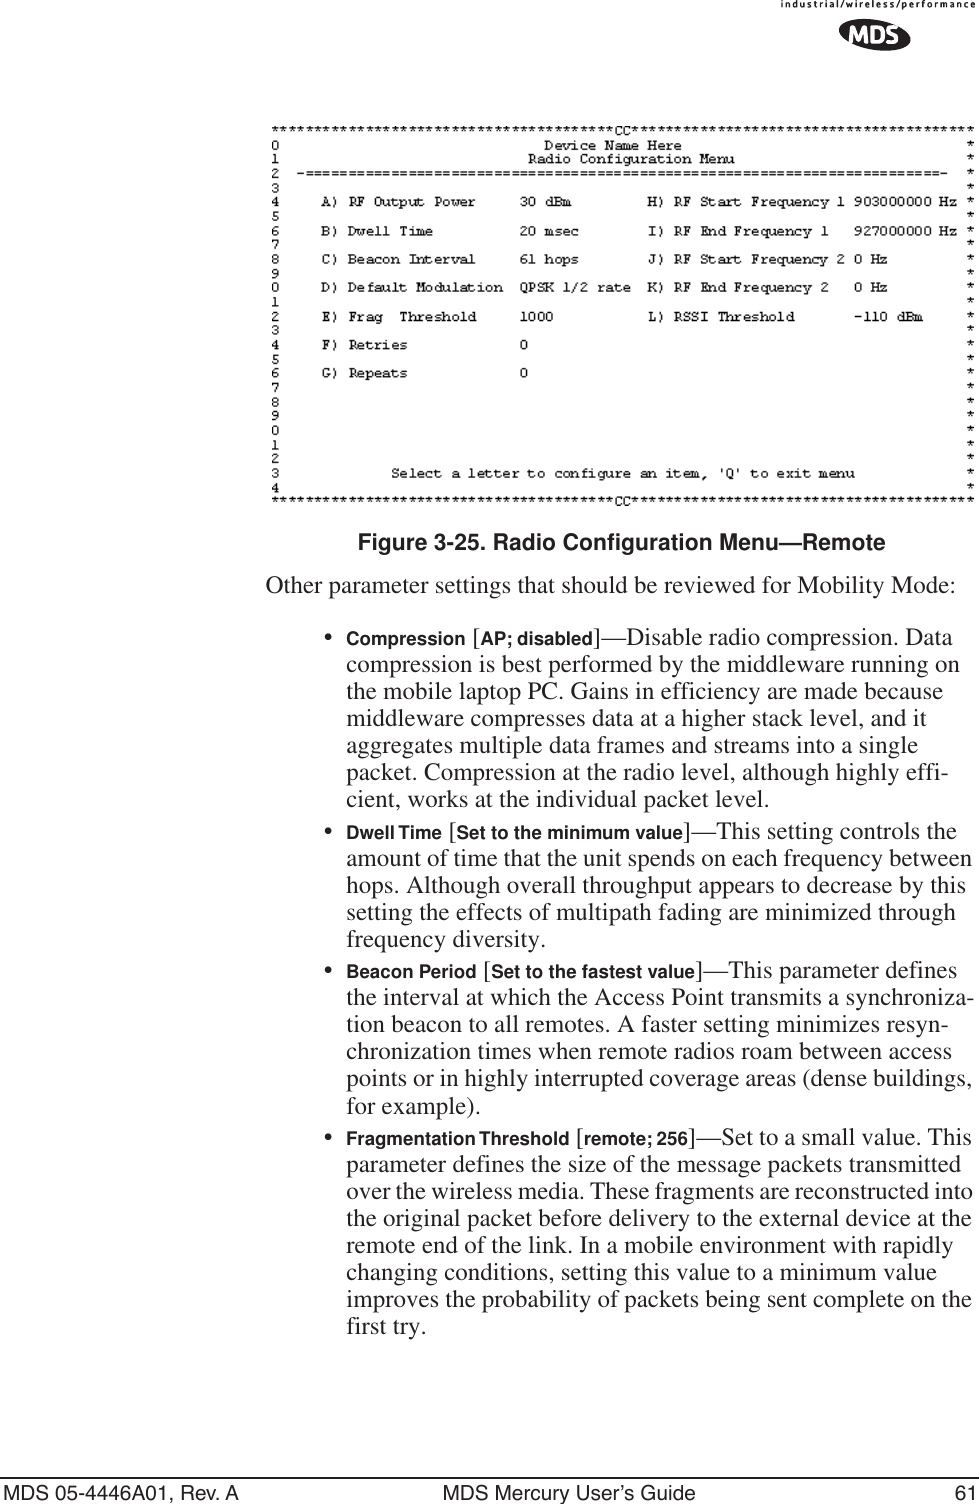 MDS 05-4446A01, Rev. A MDS Mercury User’s Guide 61Invisible place holderFigure 3-25. Radio Configuration Menu—RemoteOther parameter settings that should be reviewed for Mobility Mode:•Compression [AP; disabled]—Disable radio compression. Data compression is best performed by the middleware running on the mobile laptop PC. Gains in efficiency are made because middleware compresses data at a higher stack level, and it aggregates multiple data frames and streams into a single packet. Compression at the radio level, although highly effi-cient, works at the individual packet level.•Dwell Time [Set to the minimum value]—This setting controls the amount of time that the unit spends on each frequency between hops. Although overall throughput appears to decrease by this setting the effects of multipath fading are minimized through frequency diversity.•Beacon Period [Set to the fastest value]—This parameter defines the interval at which the Access Point transmits a synchroniza-tion beacon to all remotes. A faster setting minimizes resyn-chronization times when remote radios roam between access points or in highly interrupted coverage areas (dense buildings, for example).•Fragmentation Threshold [remote; 256]—Set to a small value. This parameter defines the size of the message packets transmitted over the wireless media. These fragments are reconstructed into the original packet before delivery to the external device at the remote end of the link. In a mobile environment with rapidly changing conditions, setting this value to a minimum value improves the probability of packets being sent complete on the first try.